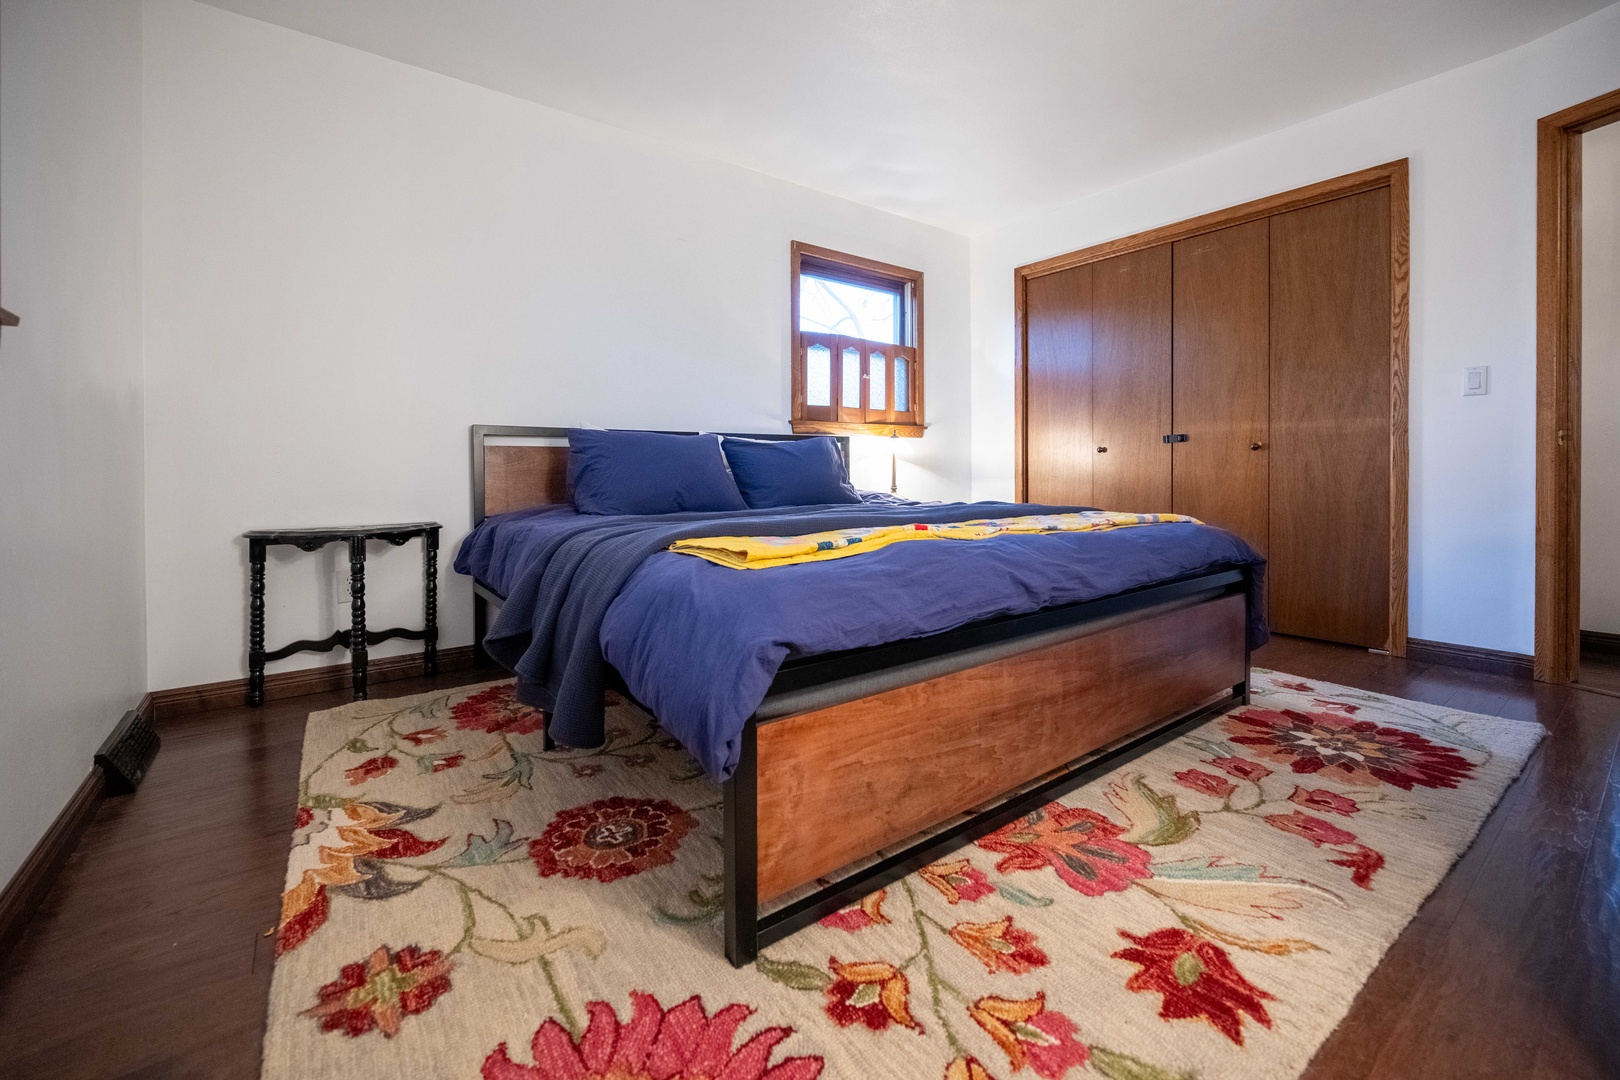 This 2nd floor suite includes a king bed & ensuite, which also connects to the hall